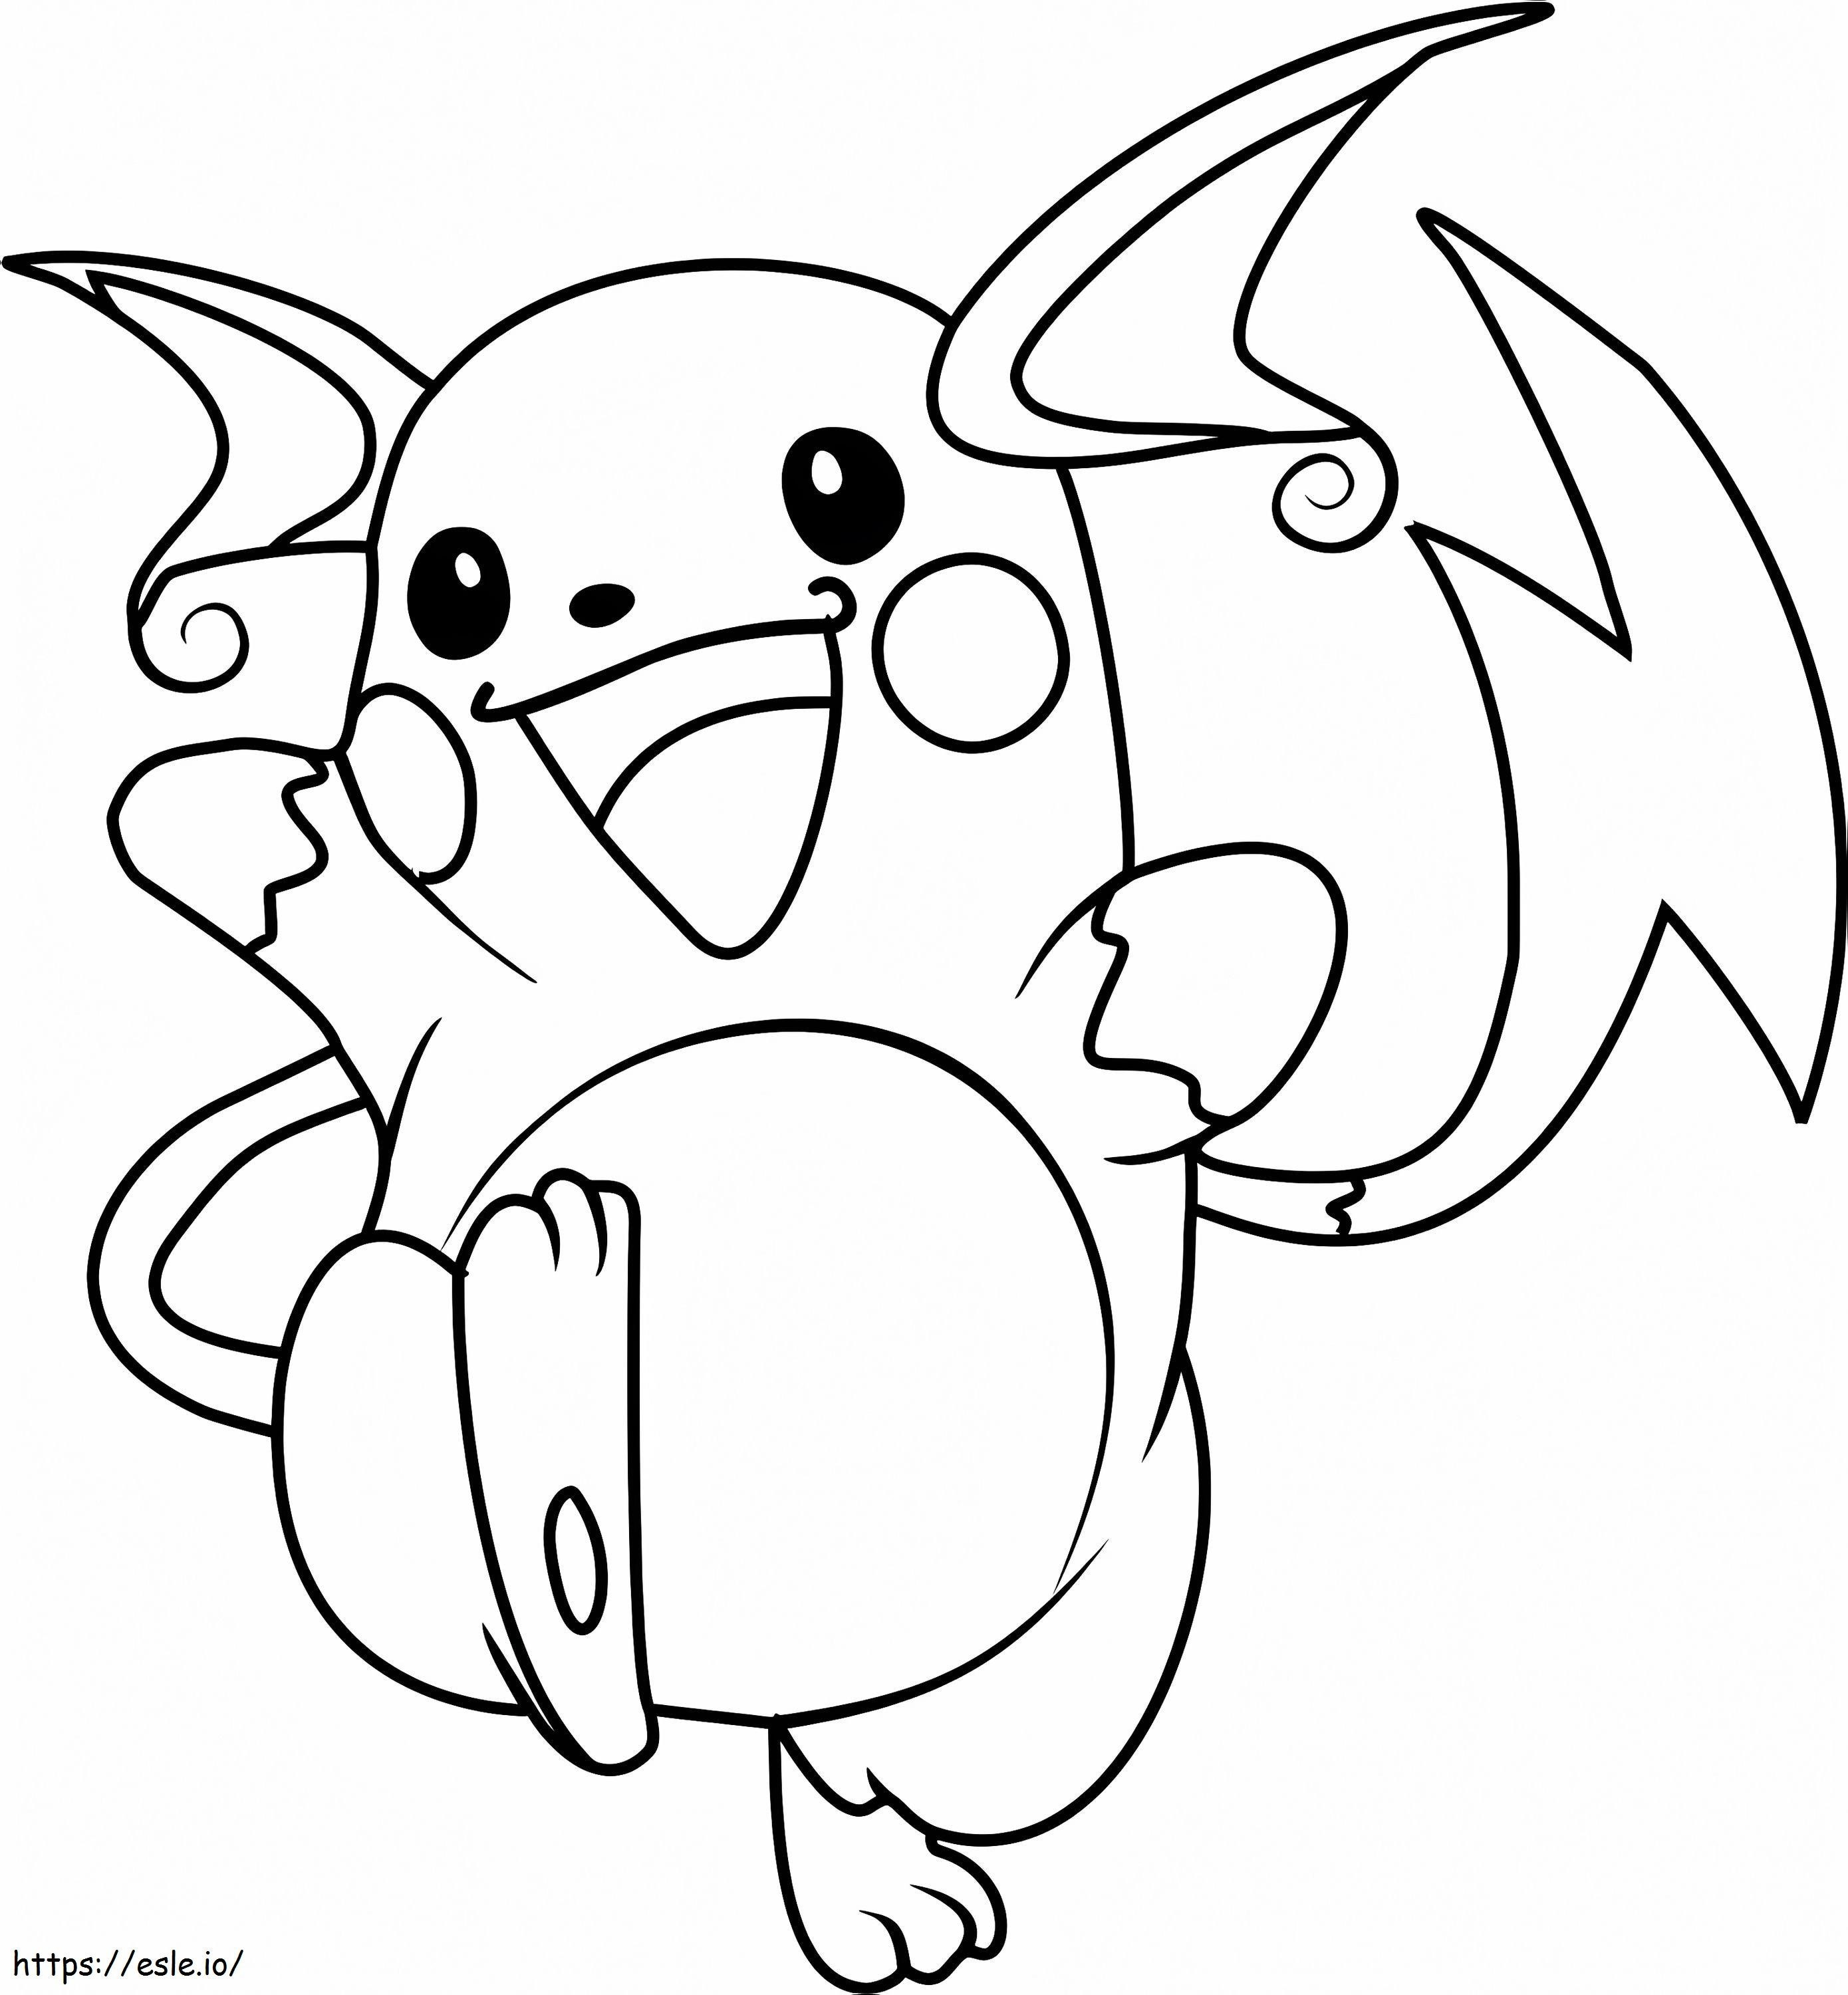 1529718855 44 coloring page